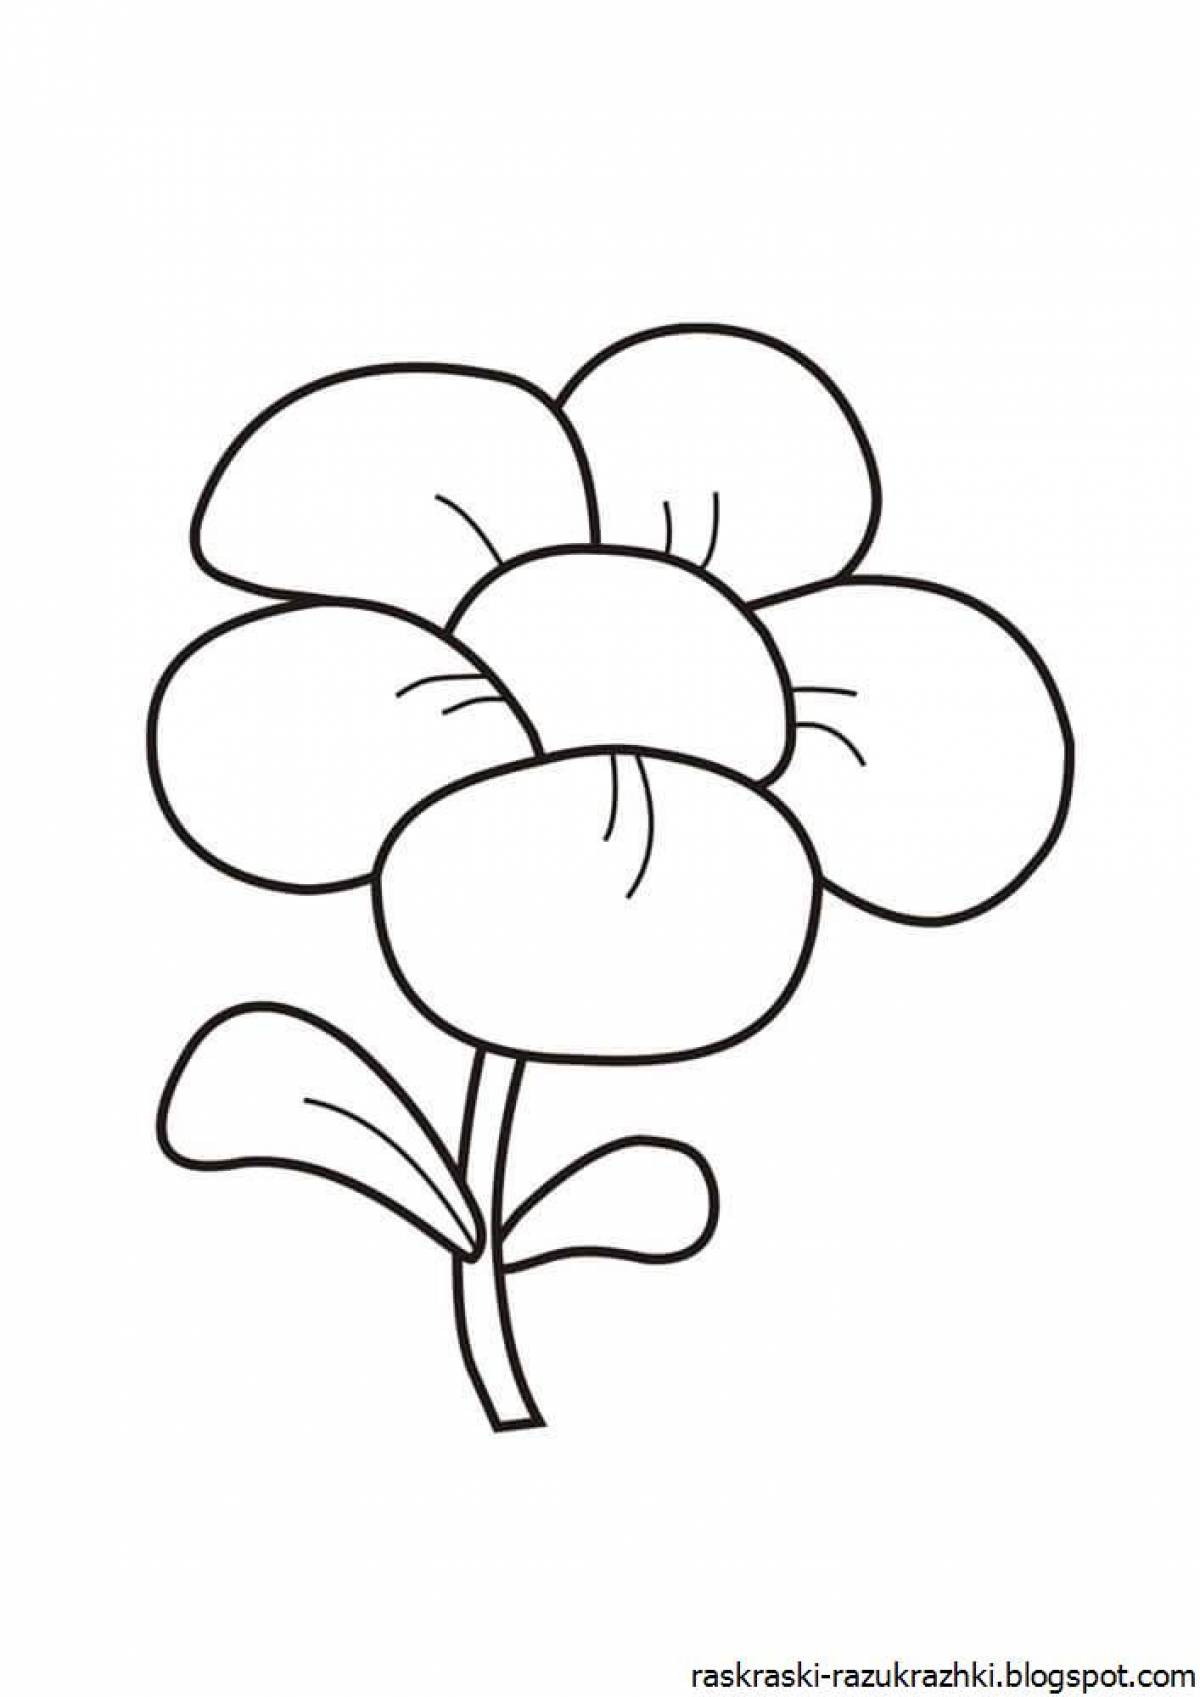 Fun flower coloring book for 3-4 year olds